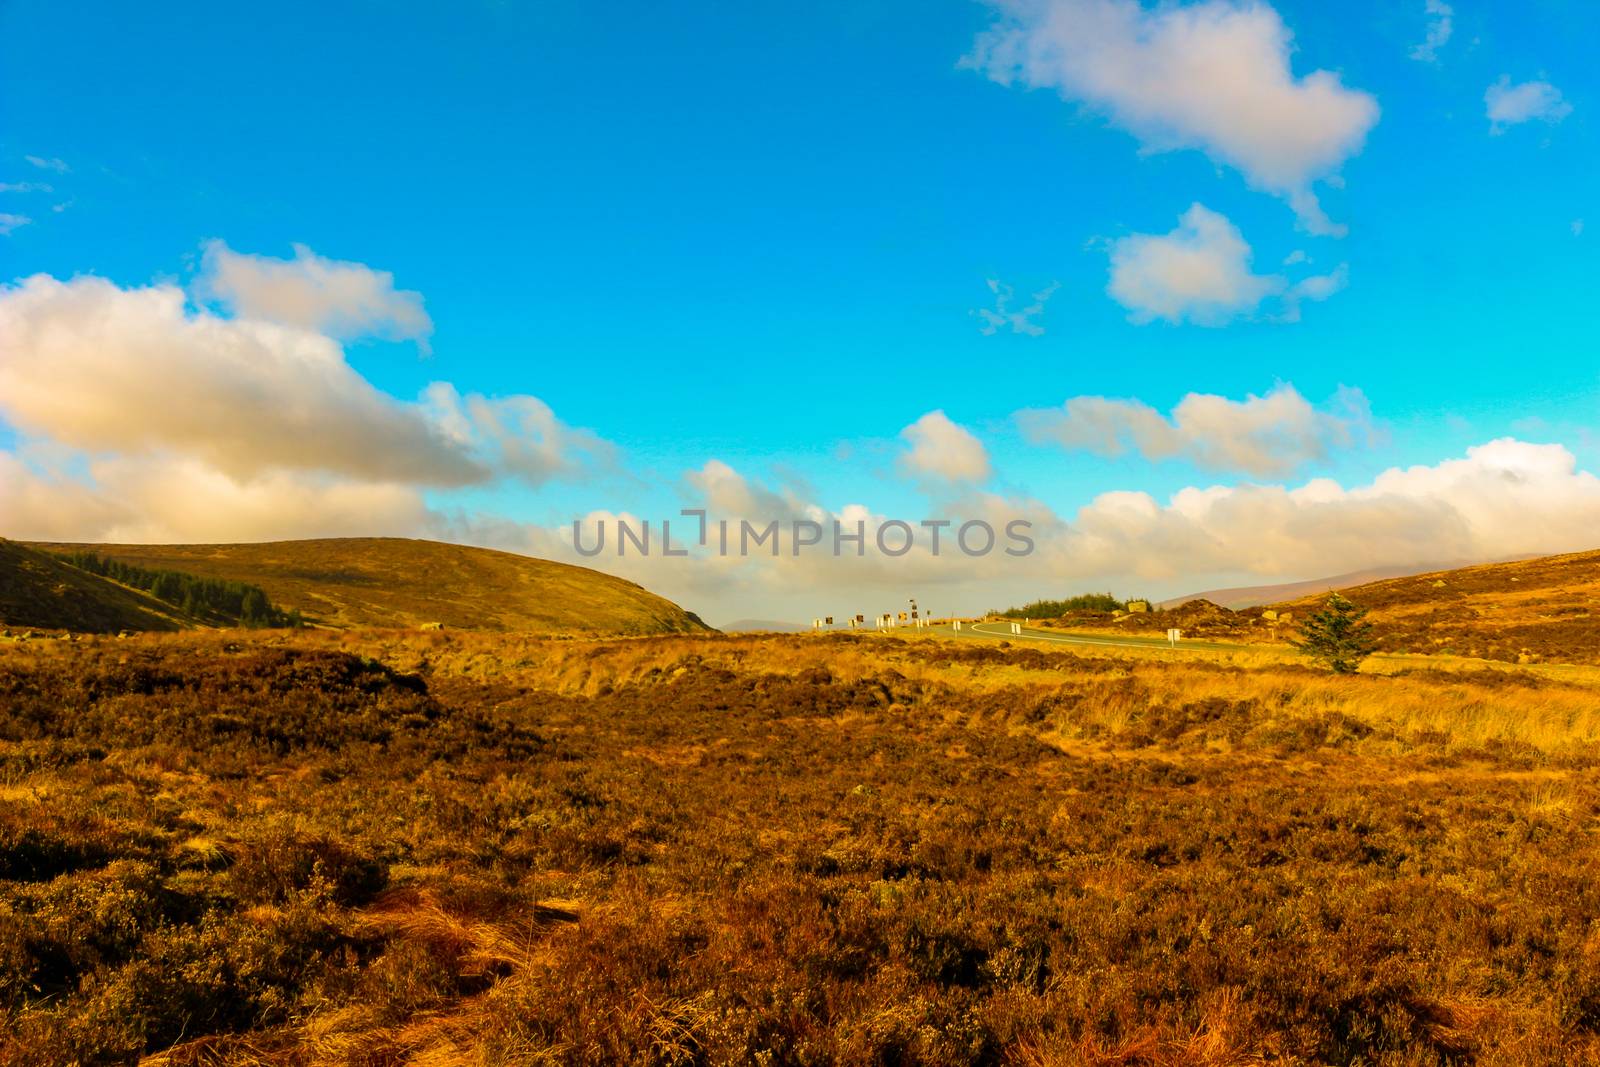 view over the Wicklow Mountains - Ireland, this time of year there is less greenery but it is still beautiful in winter.